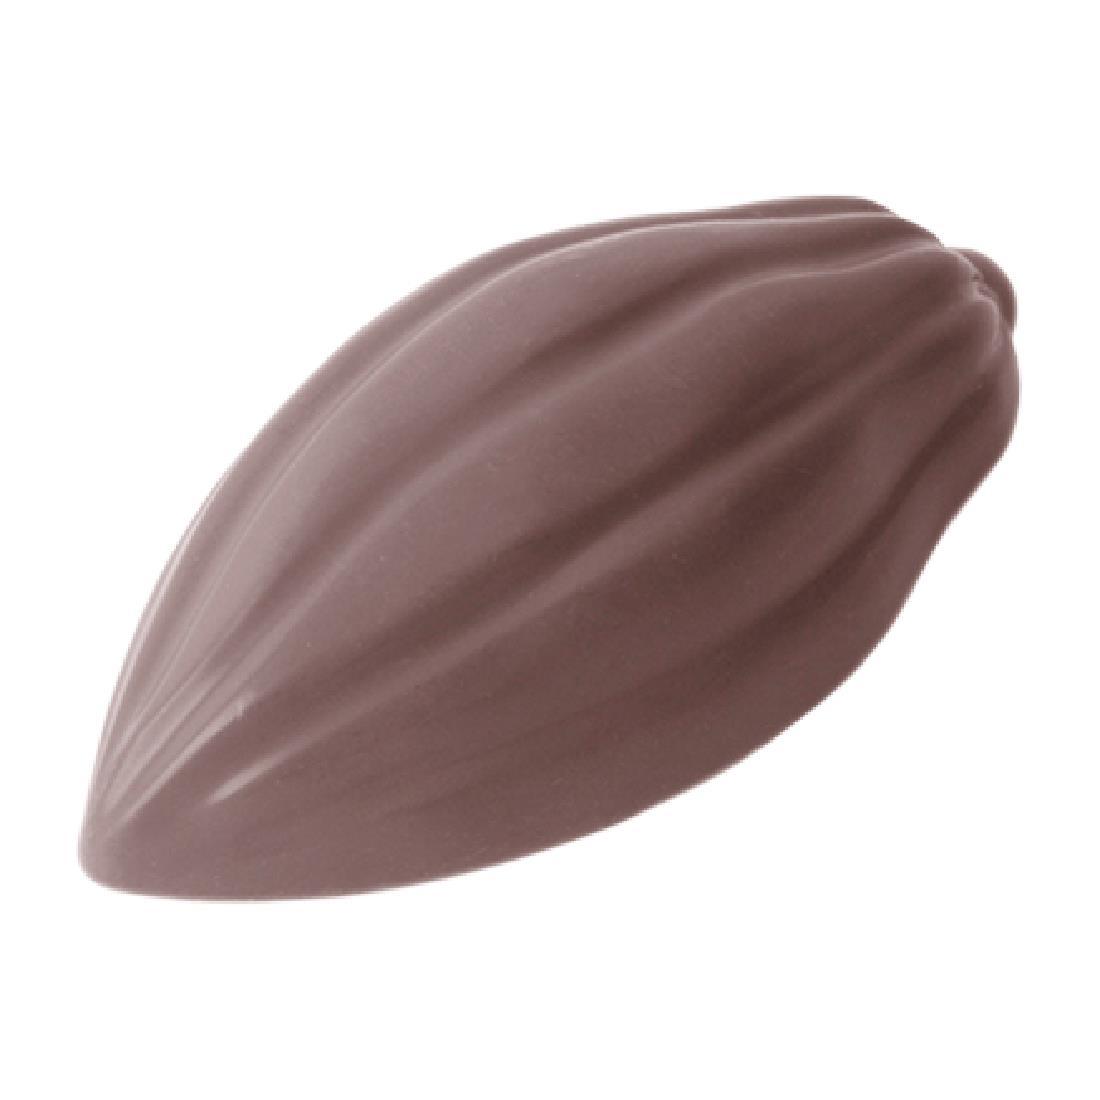 Schneider Chocolate Mould Oval Textures - DW299  - 6